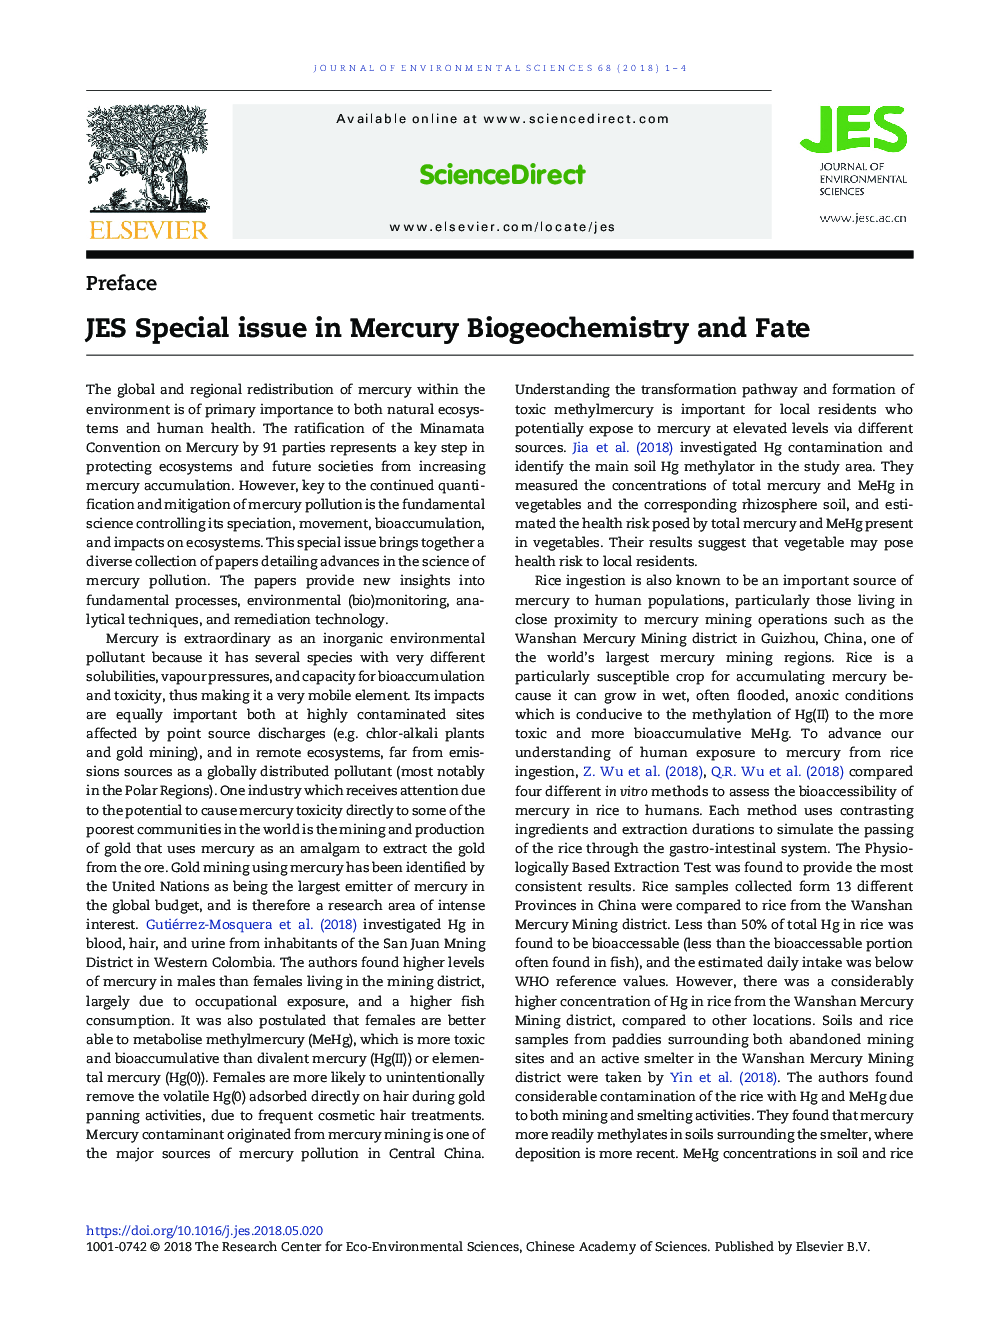 JES Special issue in Mercury Biogeochemistry and Fate